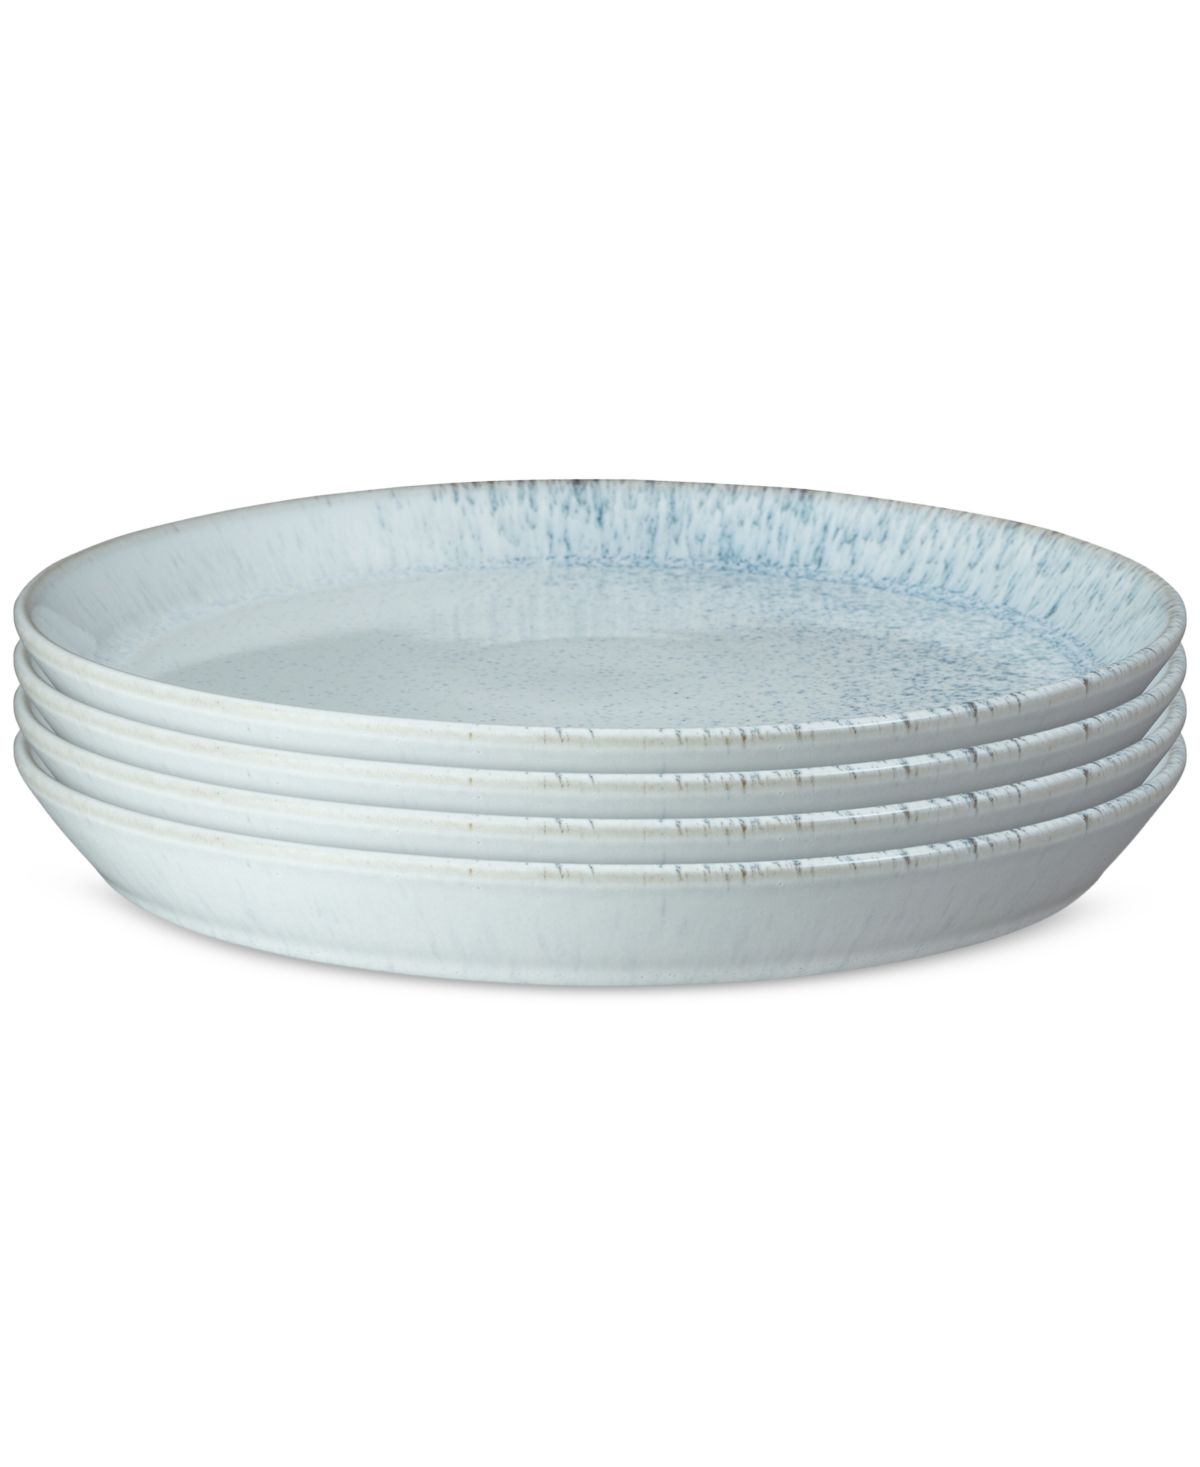 Kiln Collection Stoneware Coupe Dinner Plates, Set Of 4 - Blue